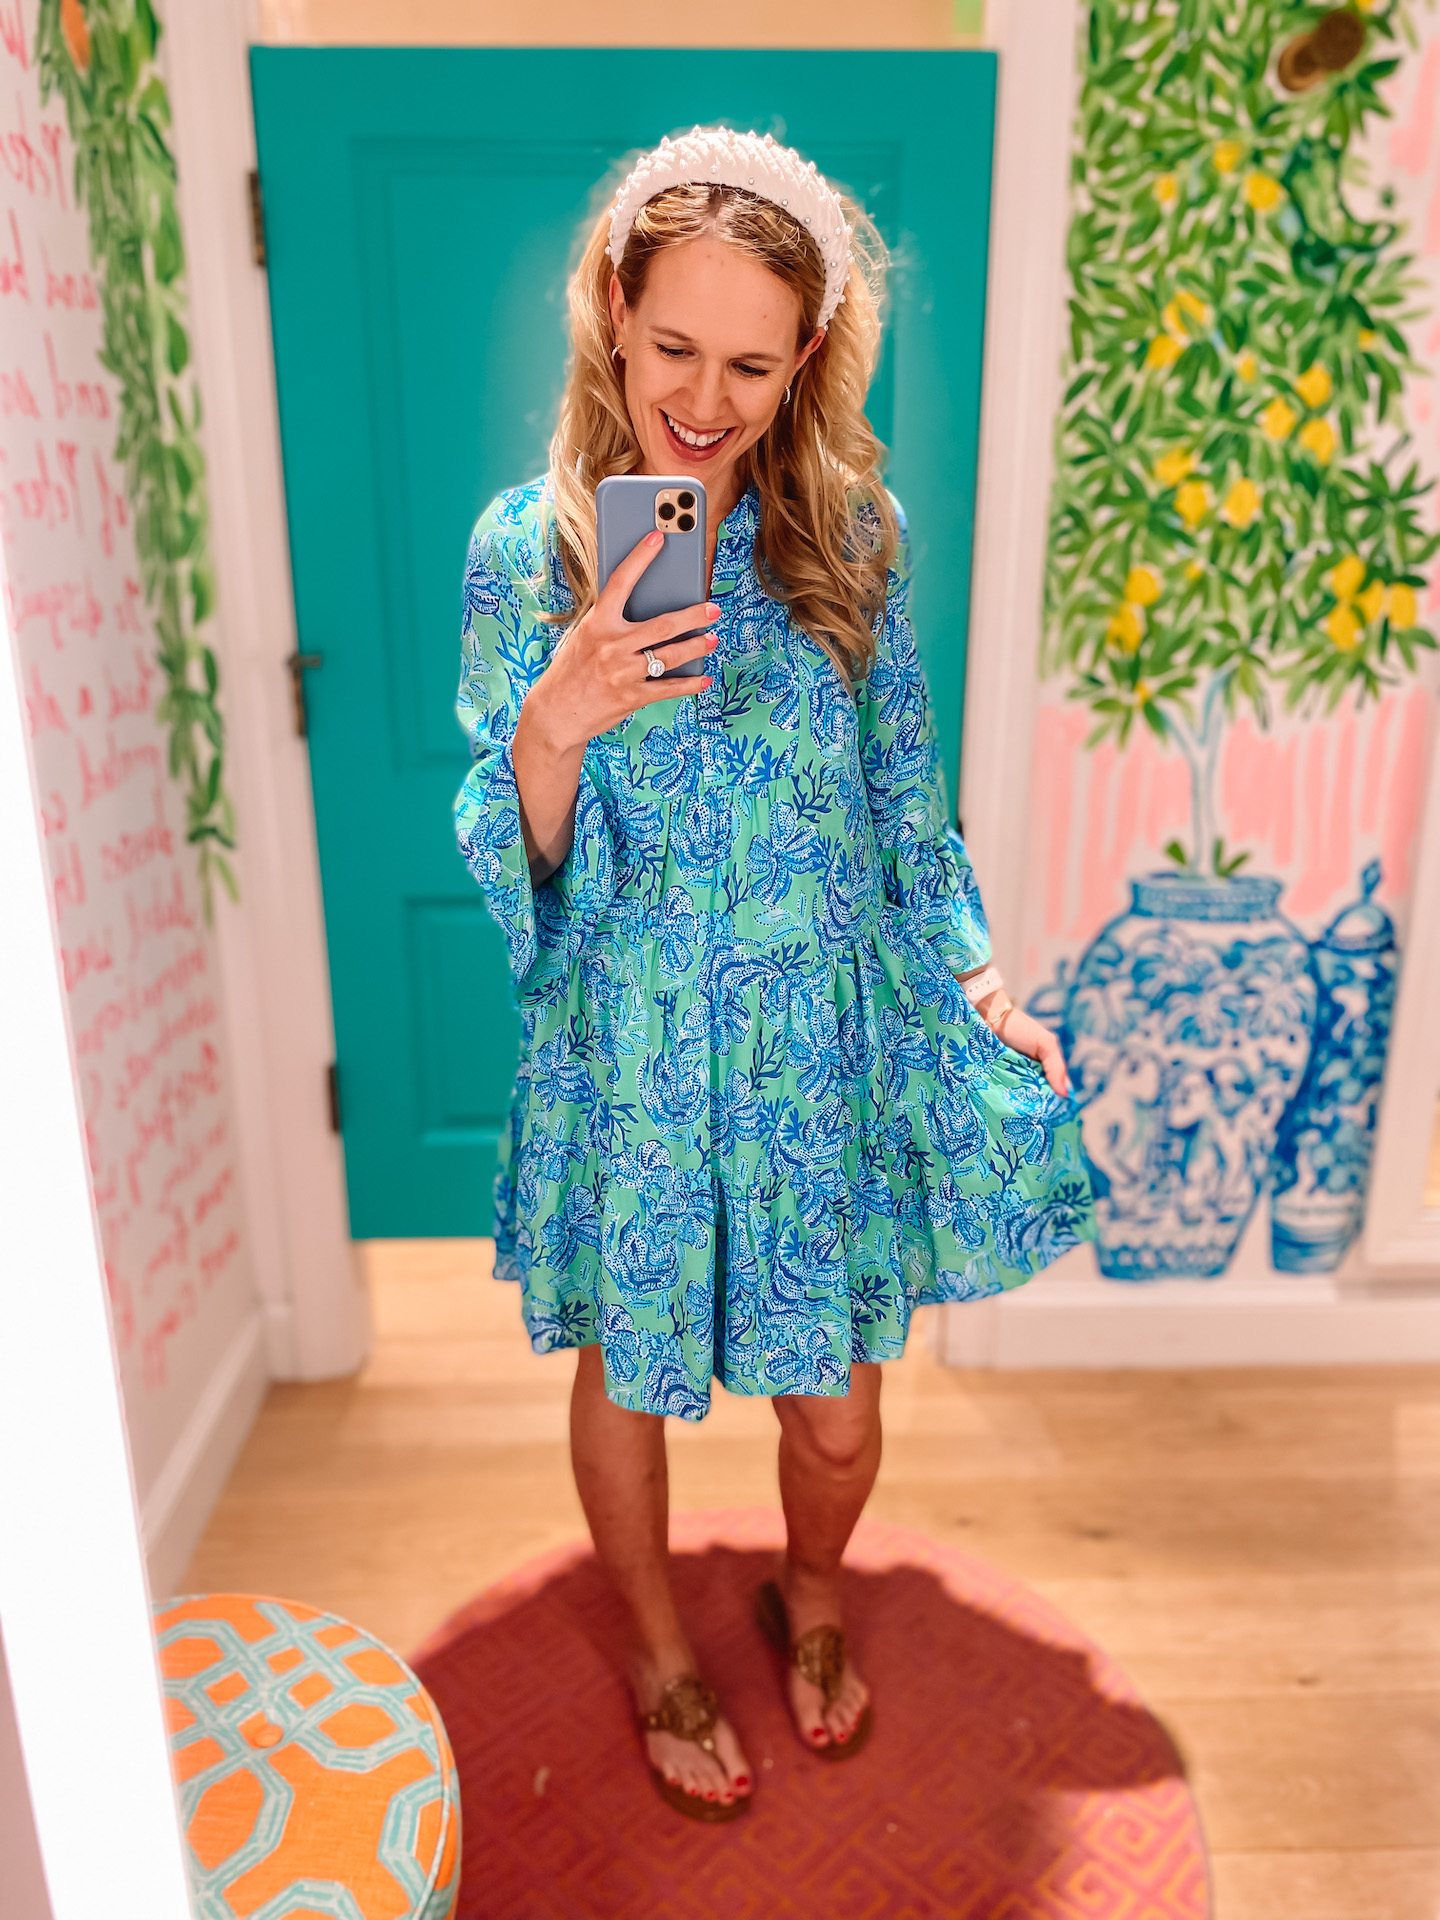 Colorful Spring Styles | Lilly Pulitzer Spring 2022